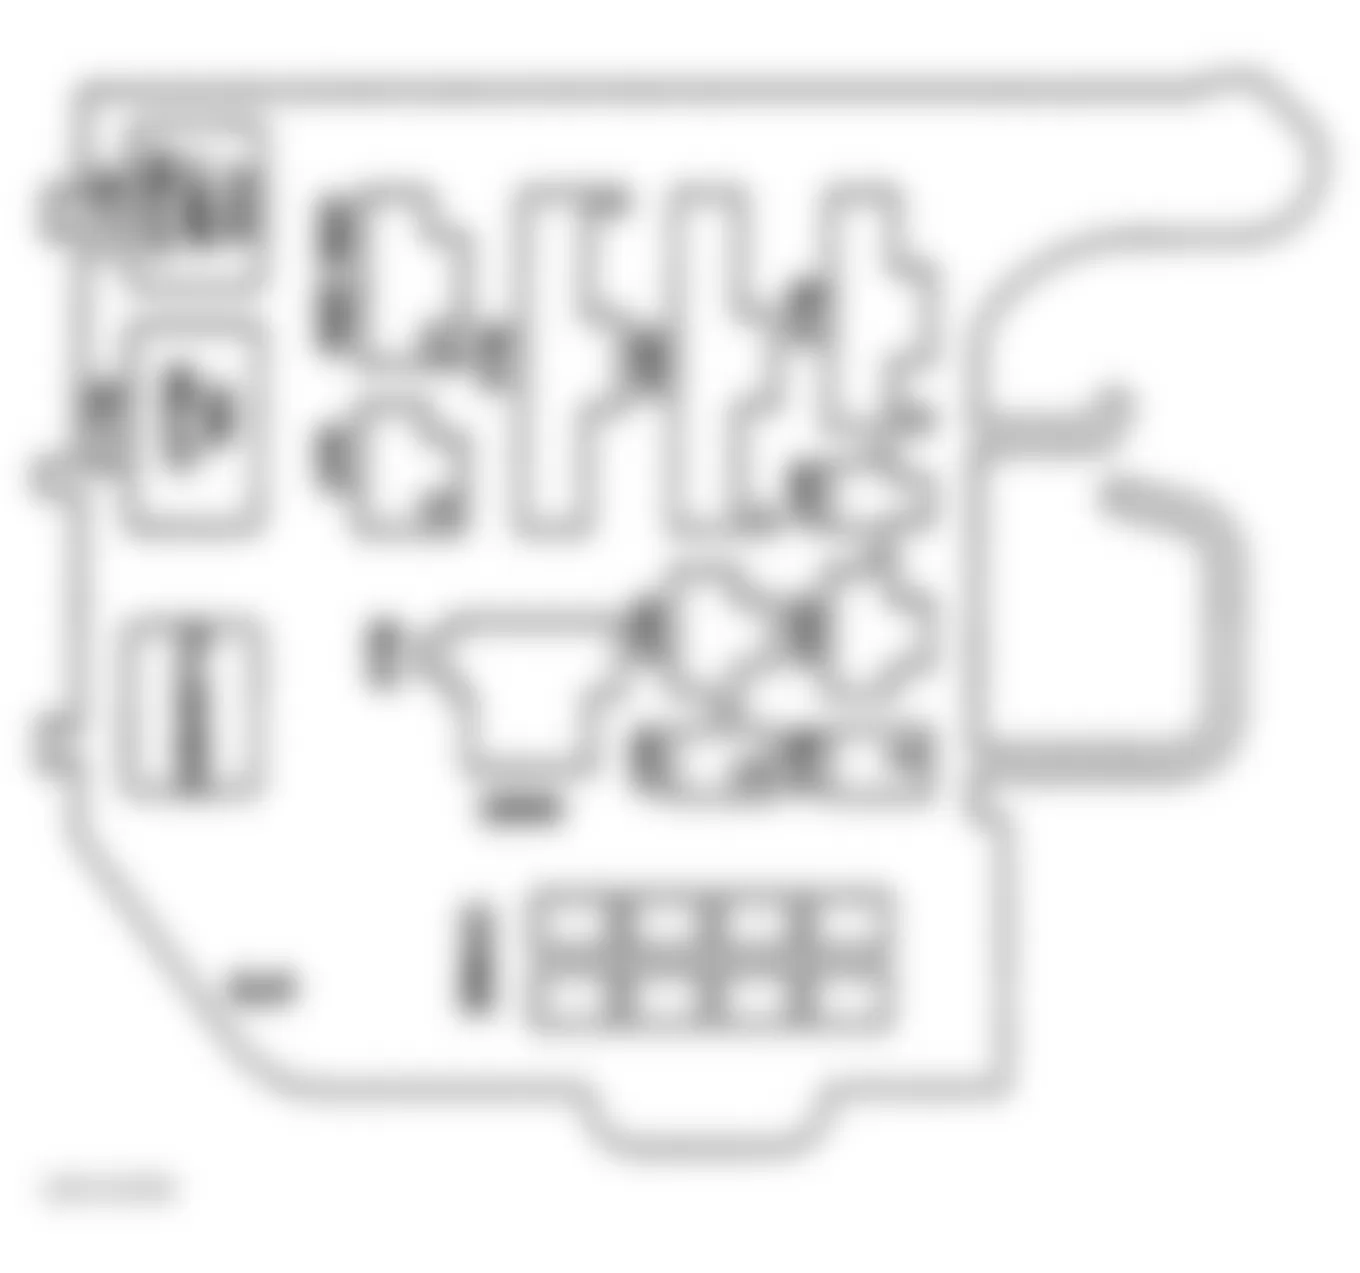 GMC Suburban C2500 1997 - Component Locations -  Identifying Convenience Center Components